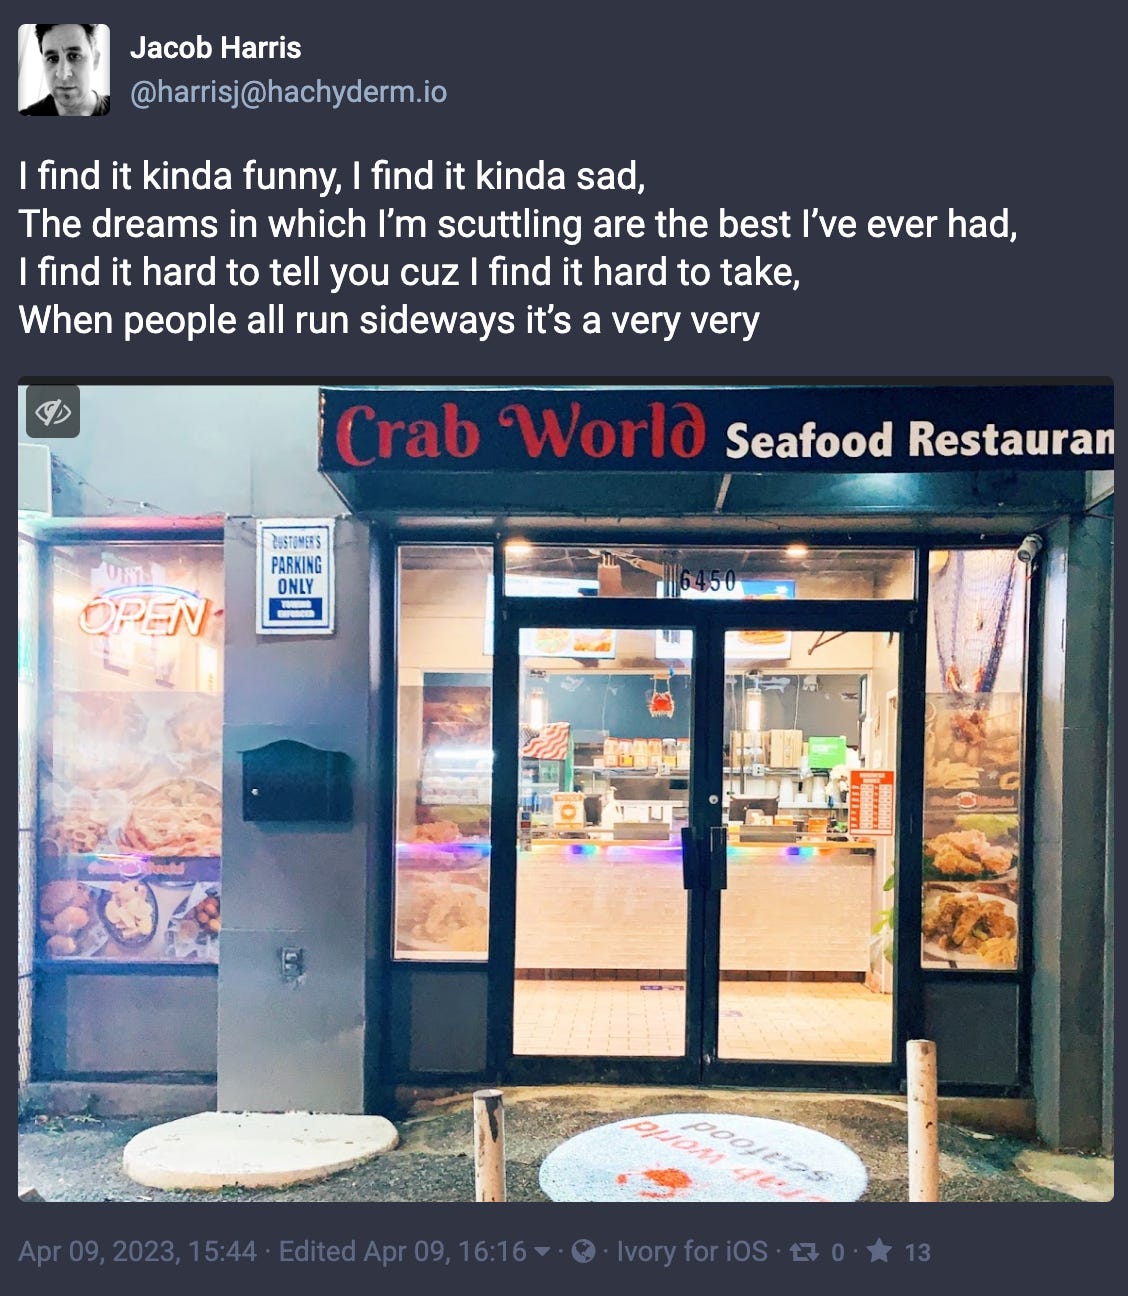 Toot from Jacob Harris: “I find it kinda funny, I find it kinda sad, The dreams in which I’m scuttling are the best I’ve ever had, I find it hard to tell you cuz I find it hard to take, When people all run sideways it’s a very very…” [embedded photo of “Crab World” seafood restaurant]